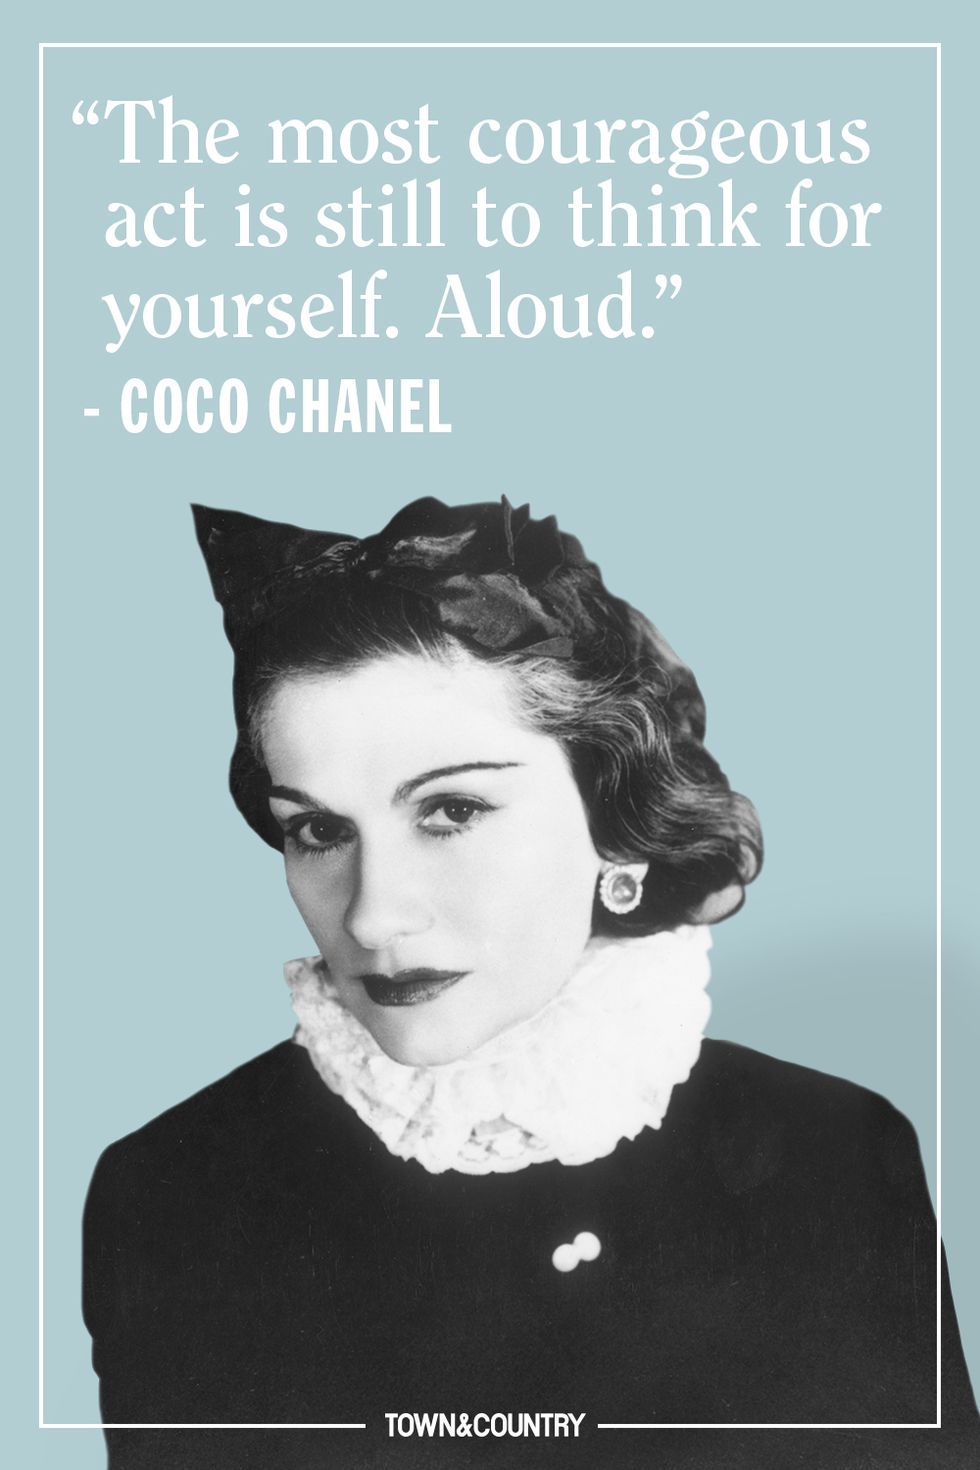 A woman who cuts her hair is about to change her life  Coco Chanel